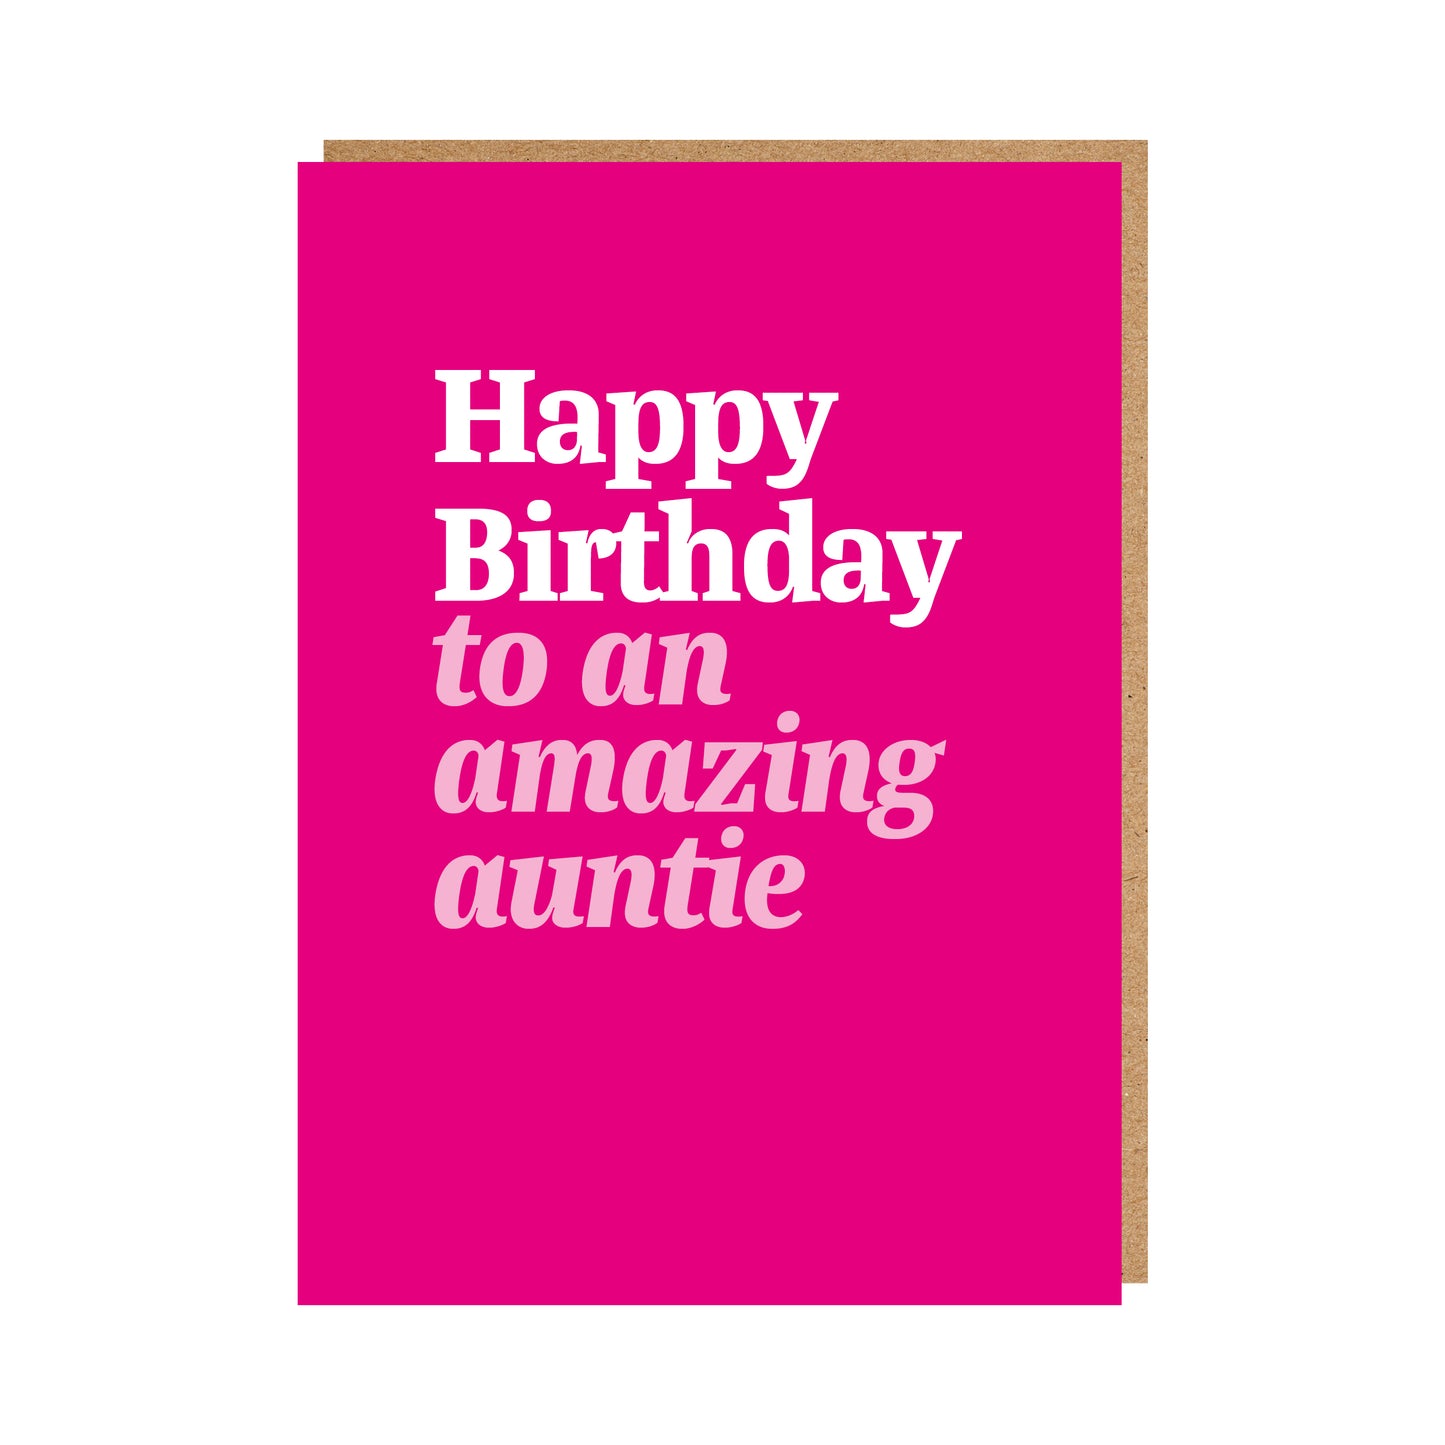 Pink Auntie Birthday Card. Text reads "Happy Birthday to an amazing auntie"